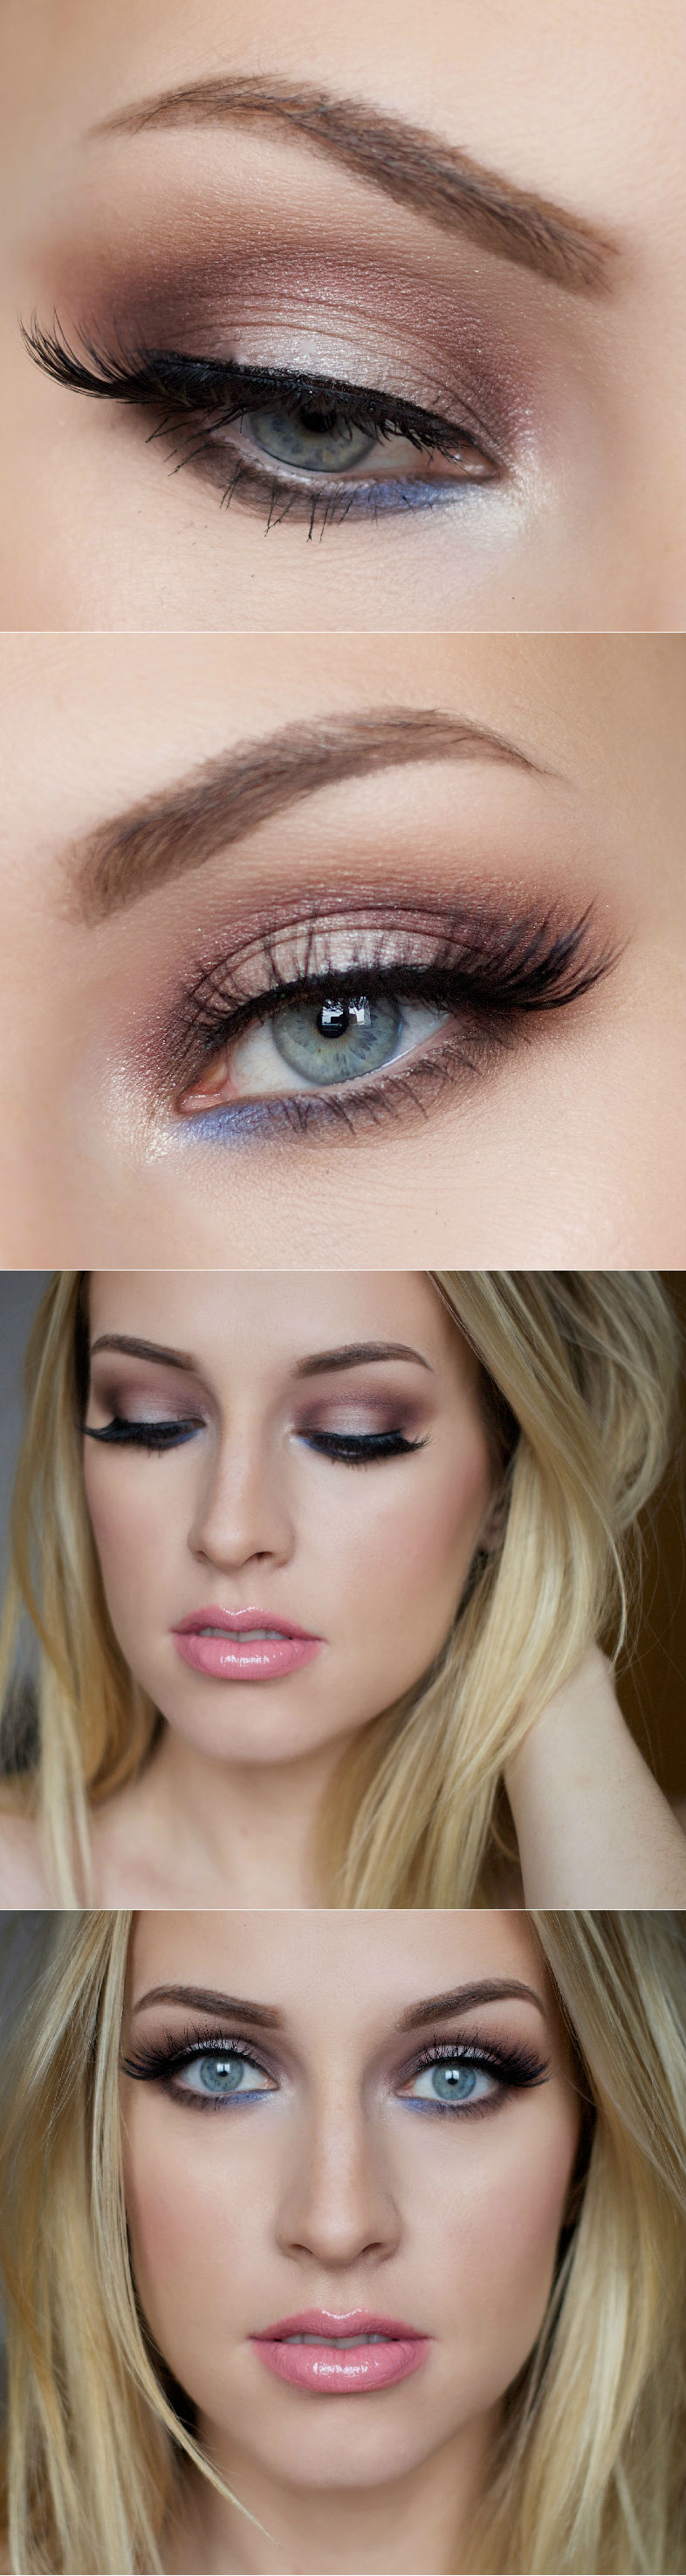 Eye Makeup Tips For Blue Eyes 5 Ways To Make Blue Eyes Pop With Proper Eye Makeup Her Style Code